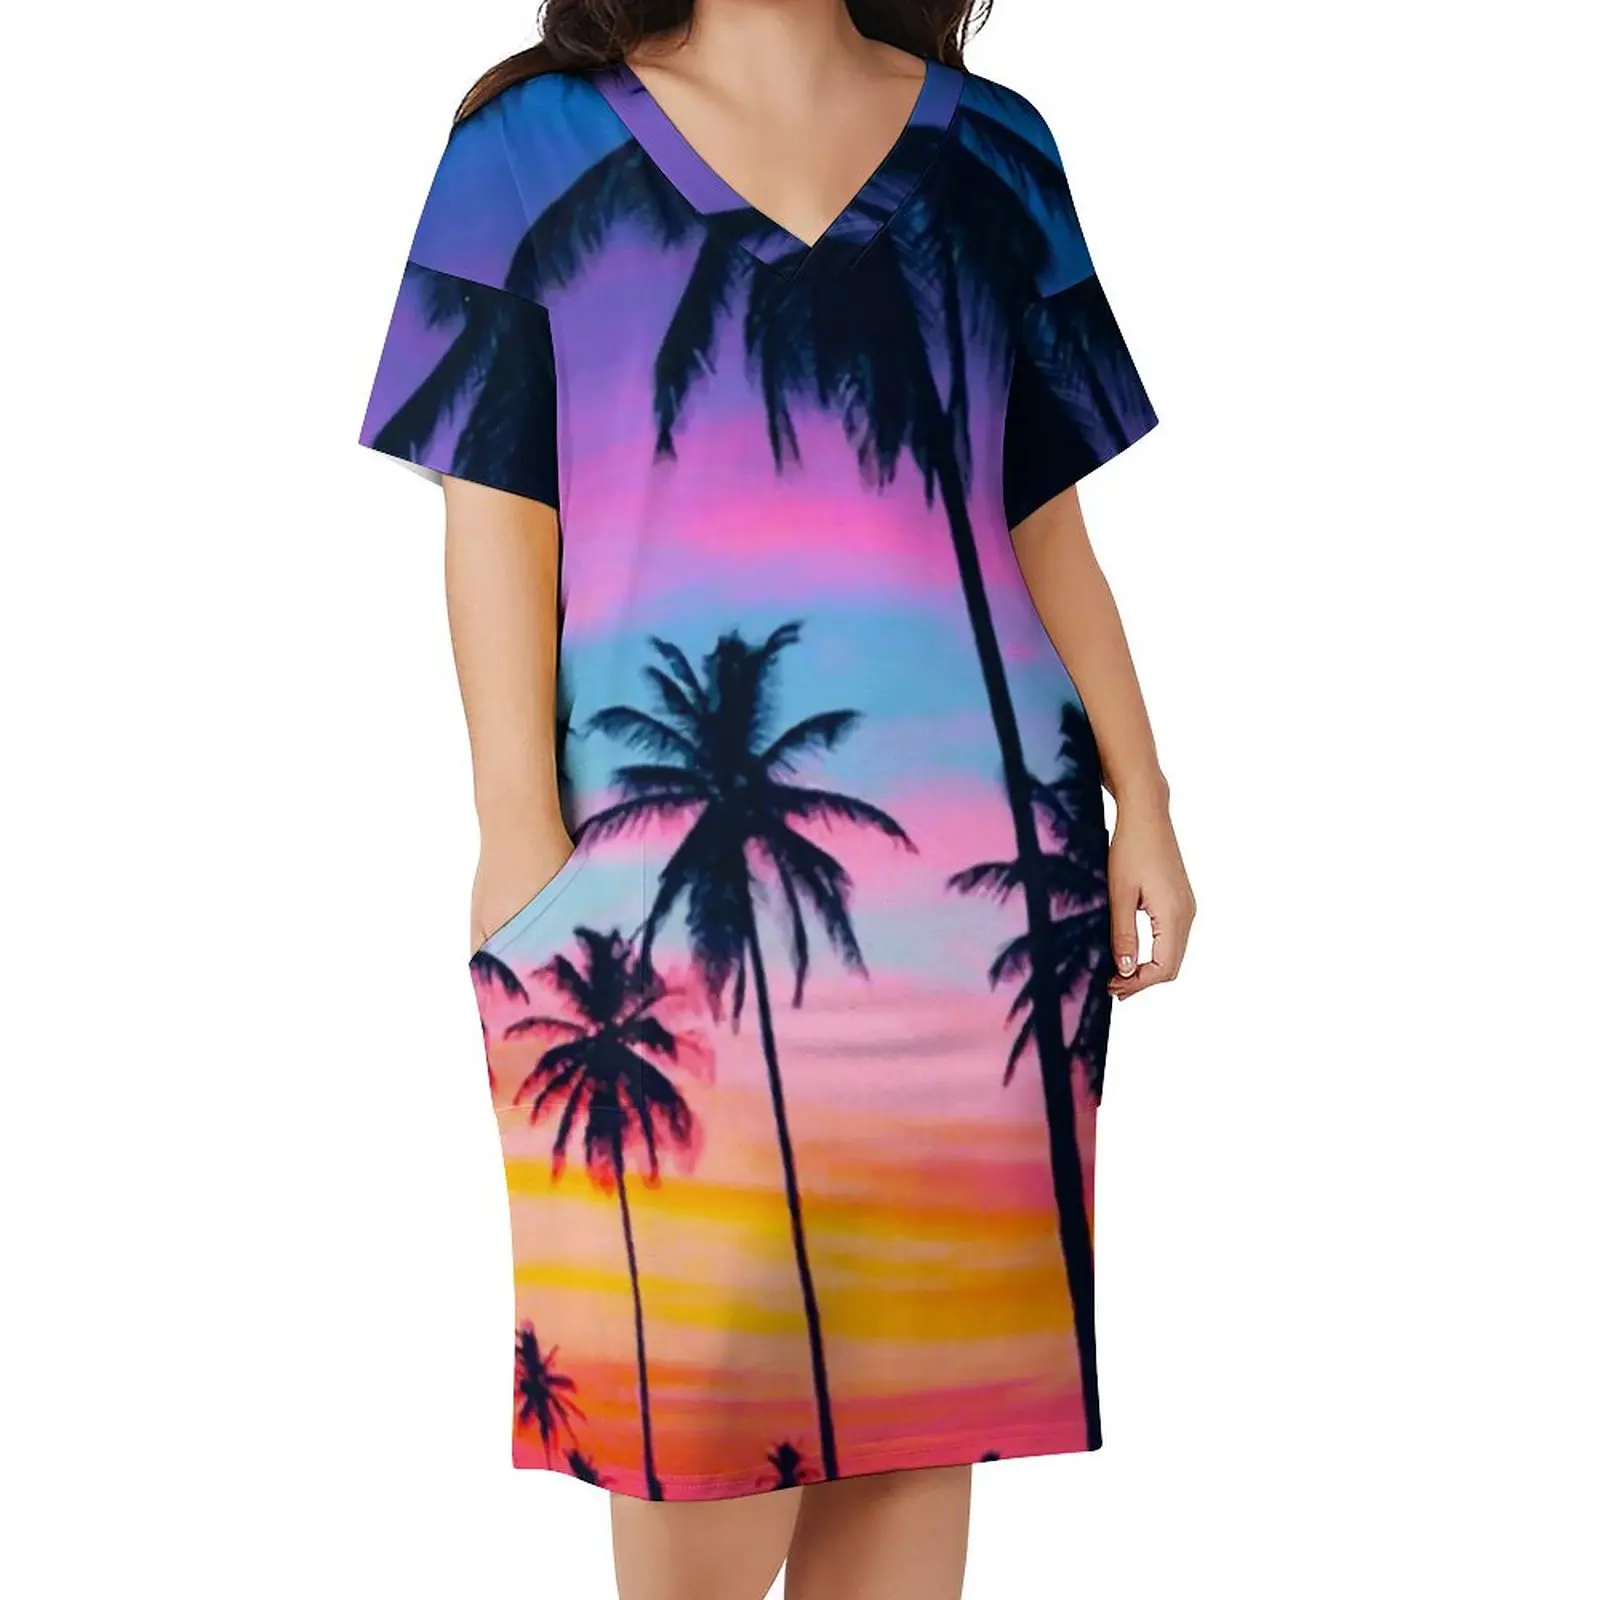 Miami Sunset Dress Plus Size Palm Trees Print Aesthetic Casual Dress Female Spring V Neck Sexy Dresses Gift Idea